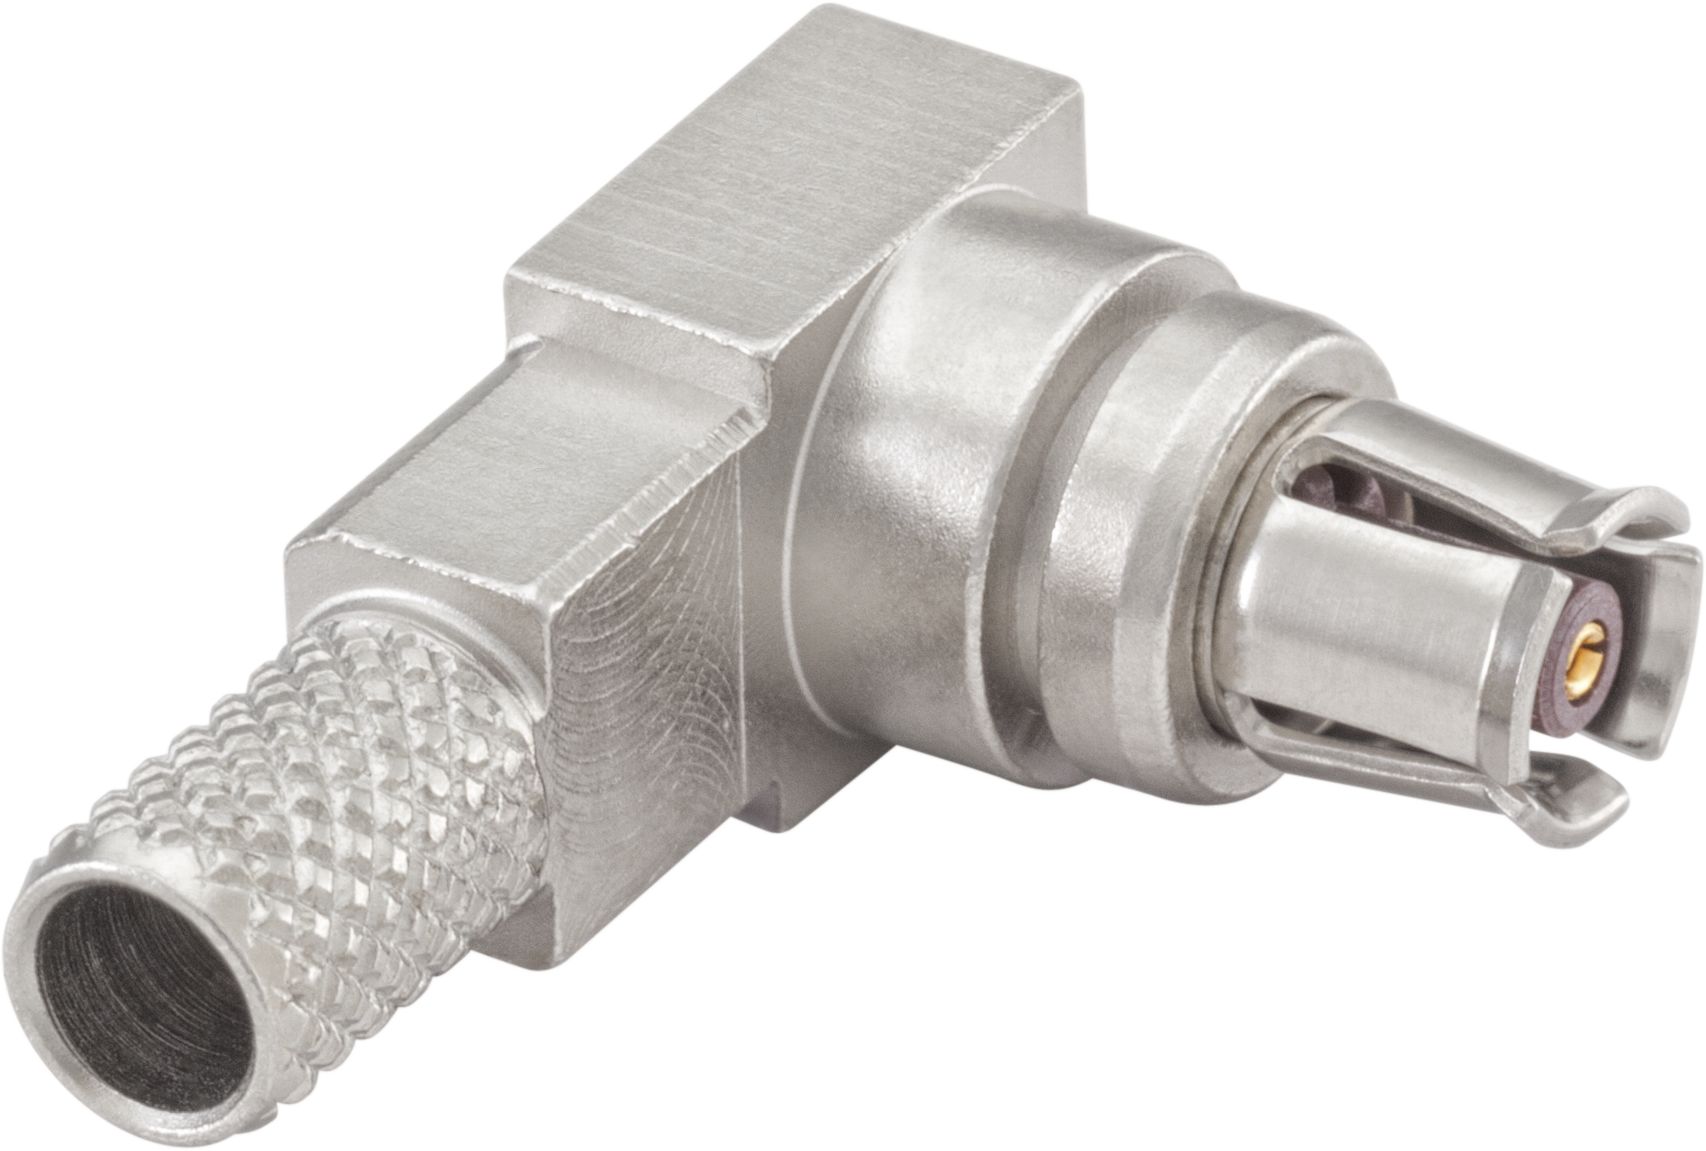 59K25H-1E4A4 right angle jack 360° | Connectors | Radio Frequency ...